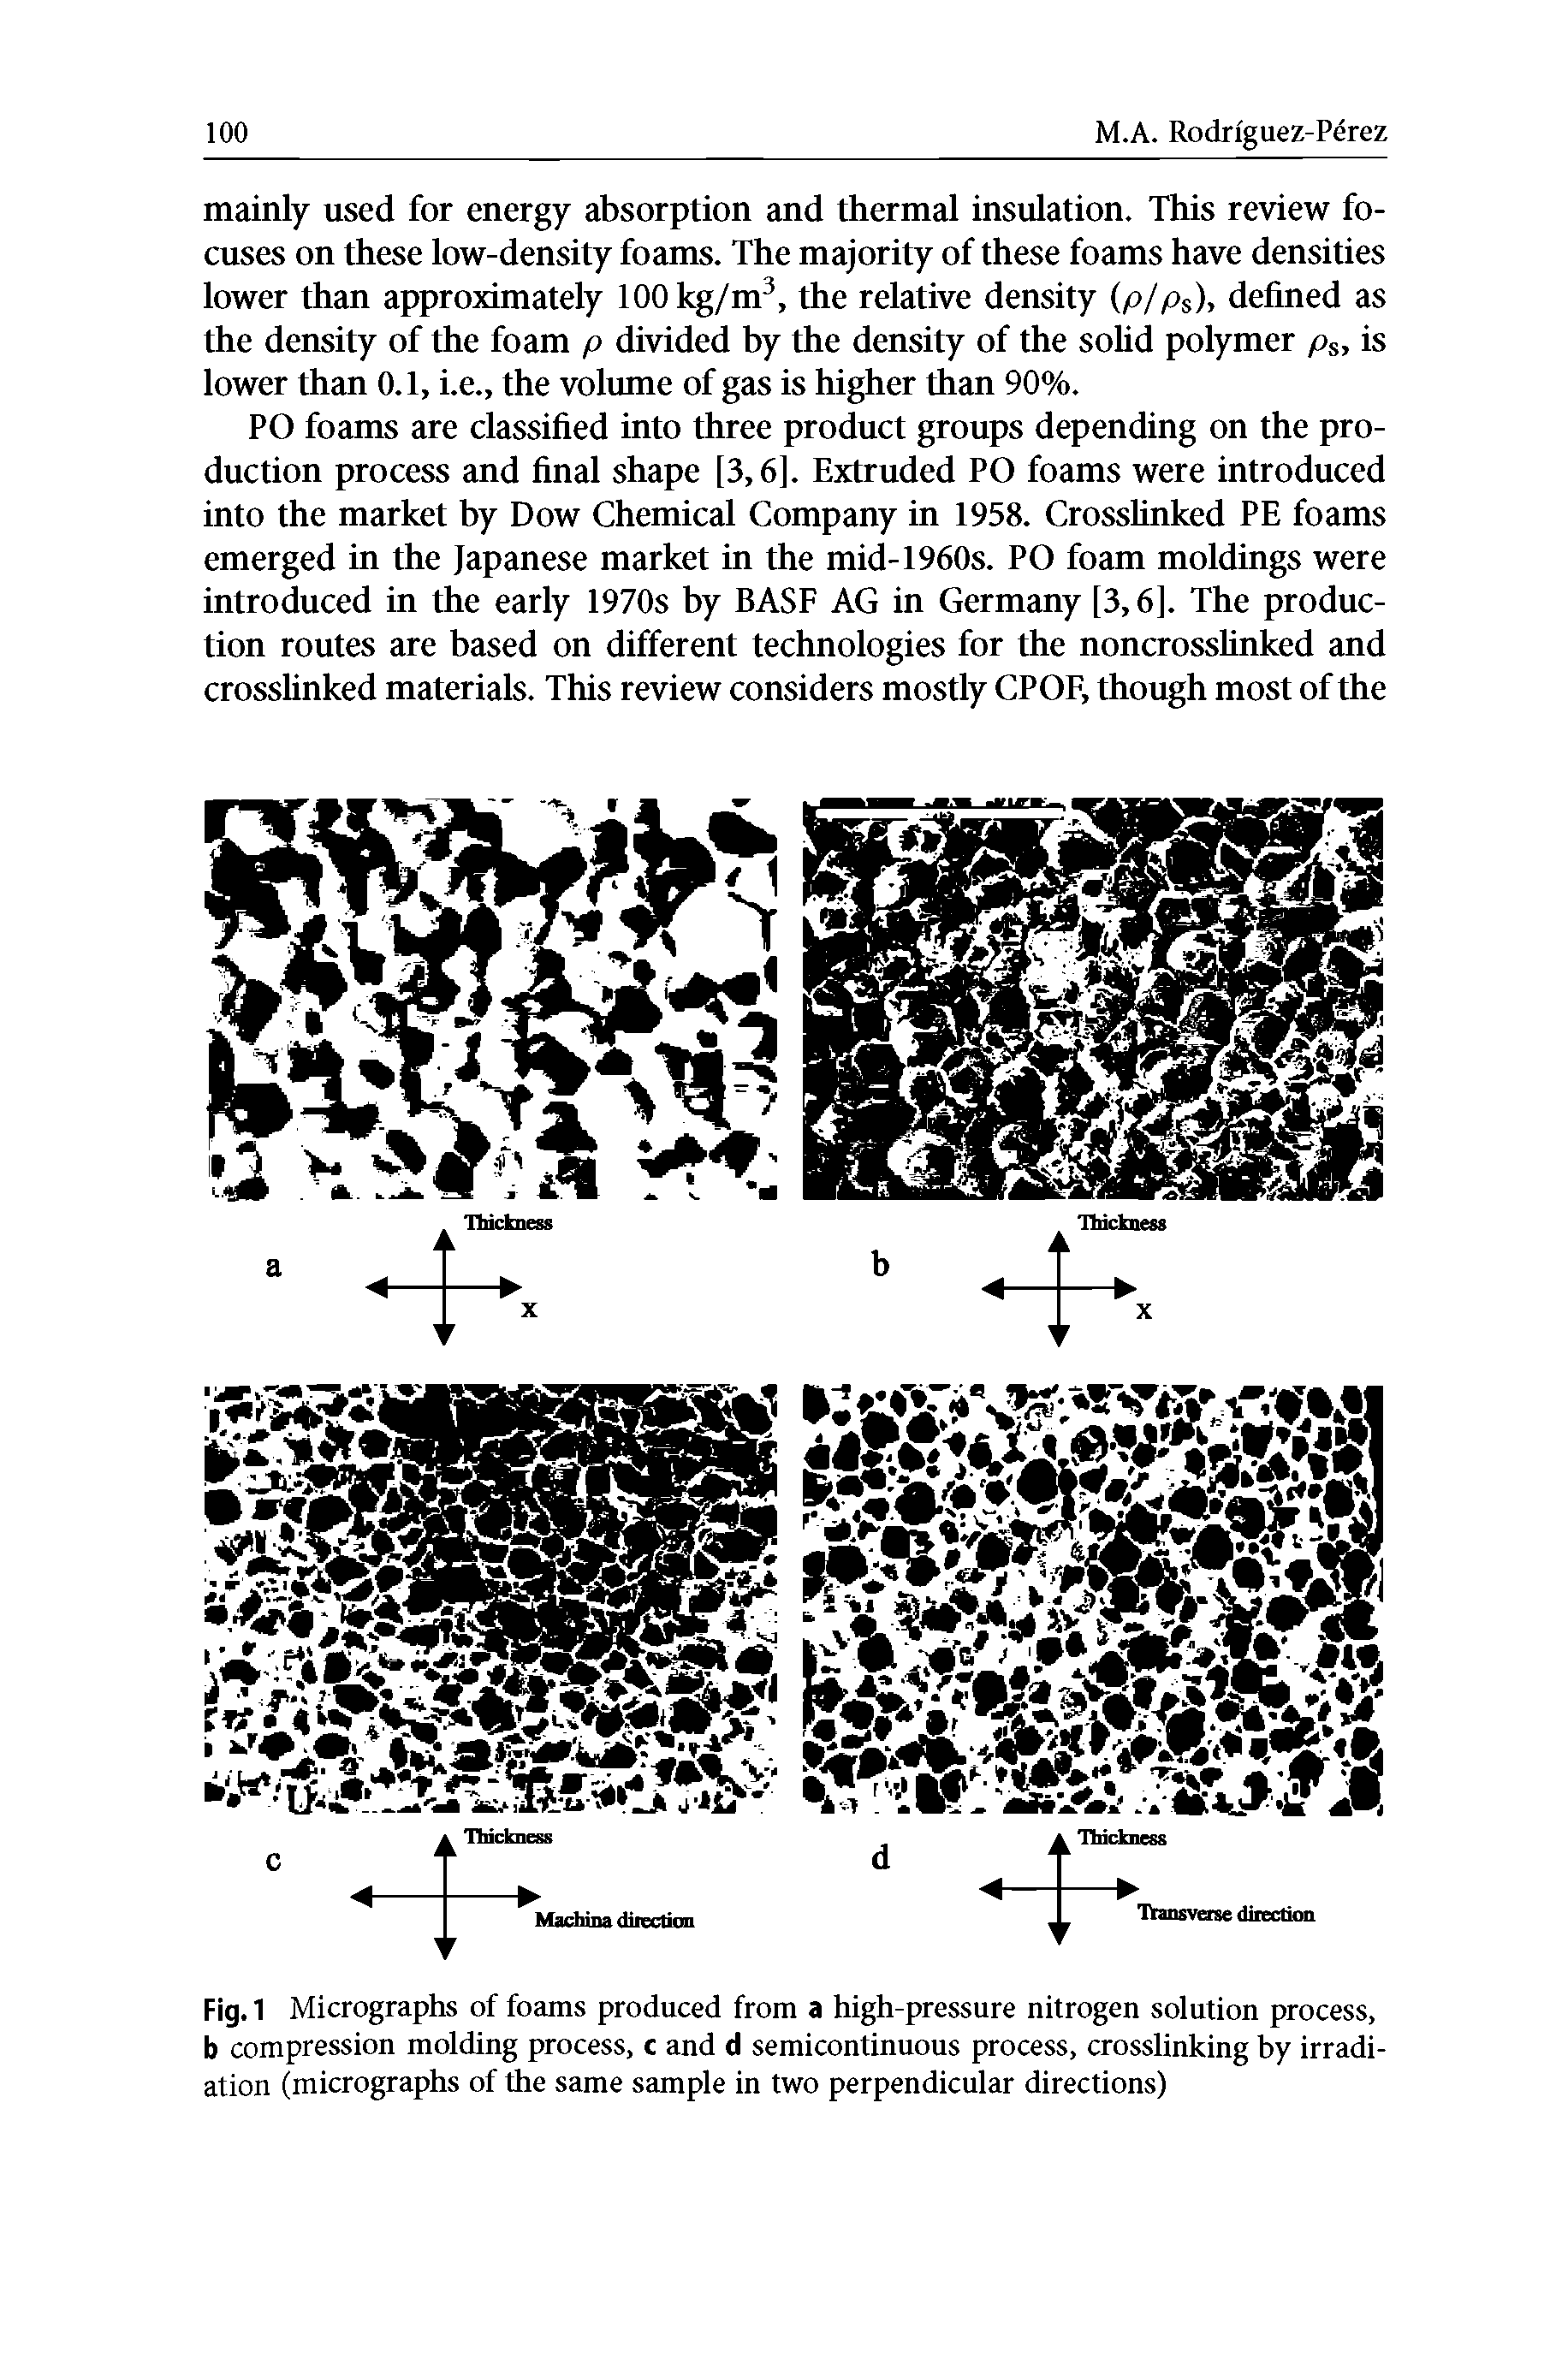 Fig. 1 Micrographs of foams produced from a high-pressure nitrogen solution process, b compression molding process, c and d semicontinuous process, crosslinking by irradiation (micrographs of the same sample in two perpendicular directions)...